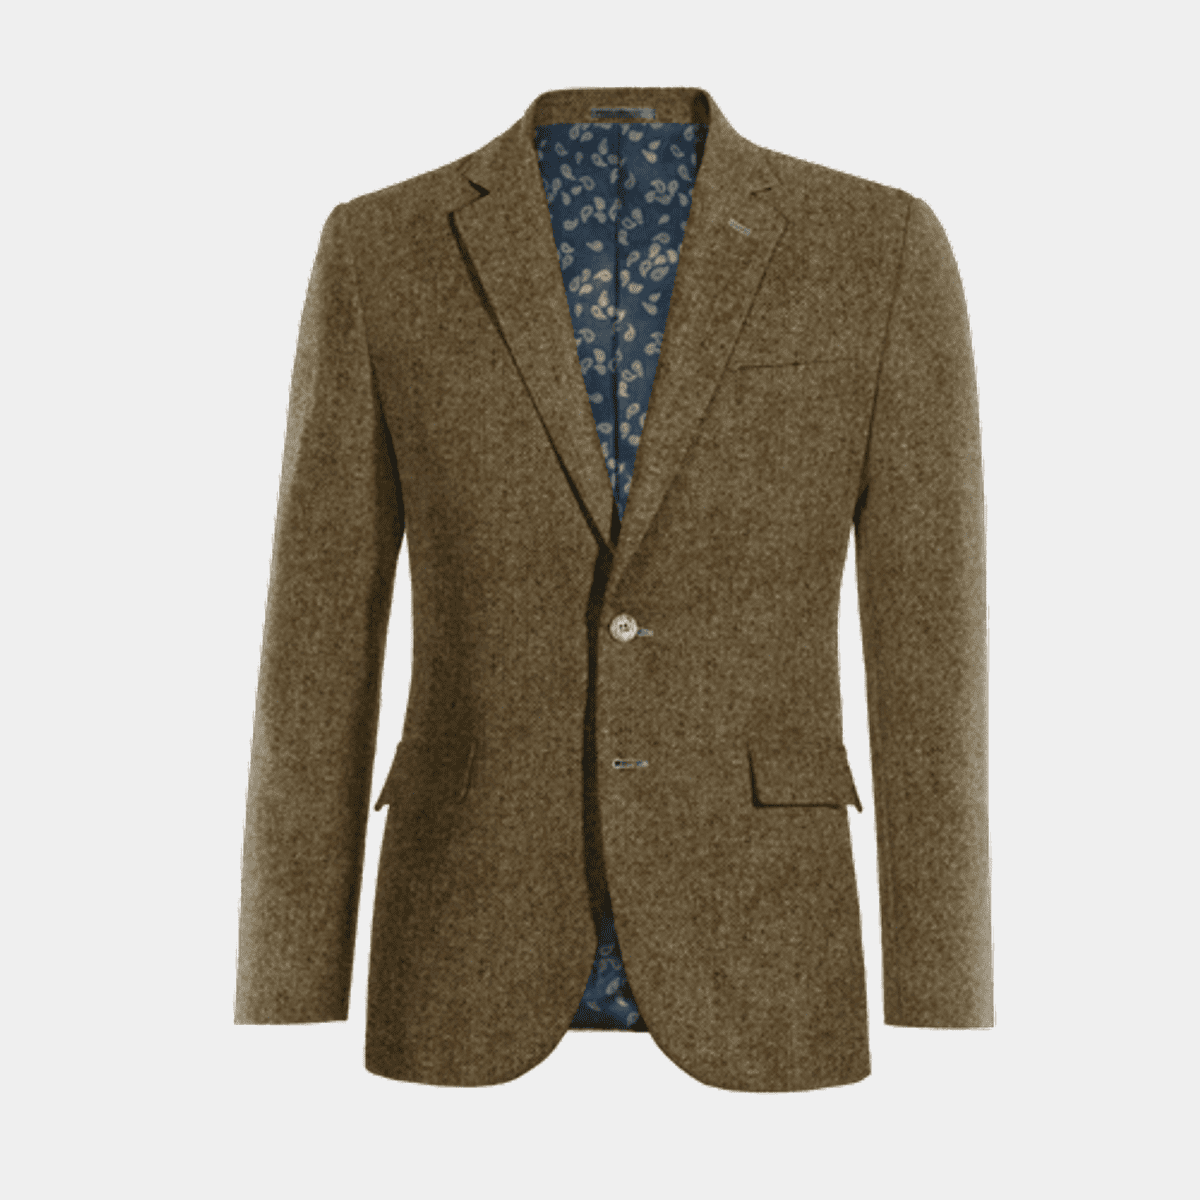 Light Grey Donegal Tweed Limited Blazer with Elbow Patches at Hockerty